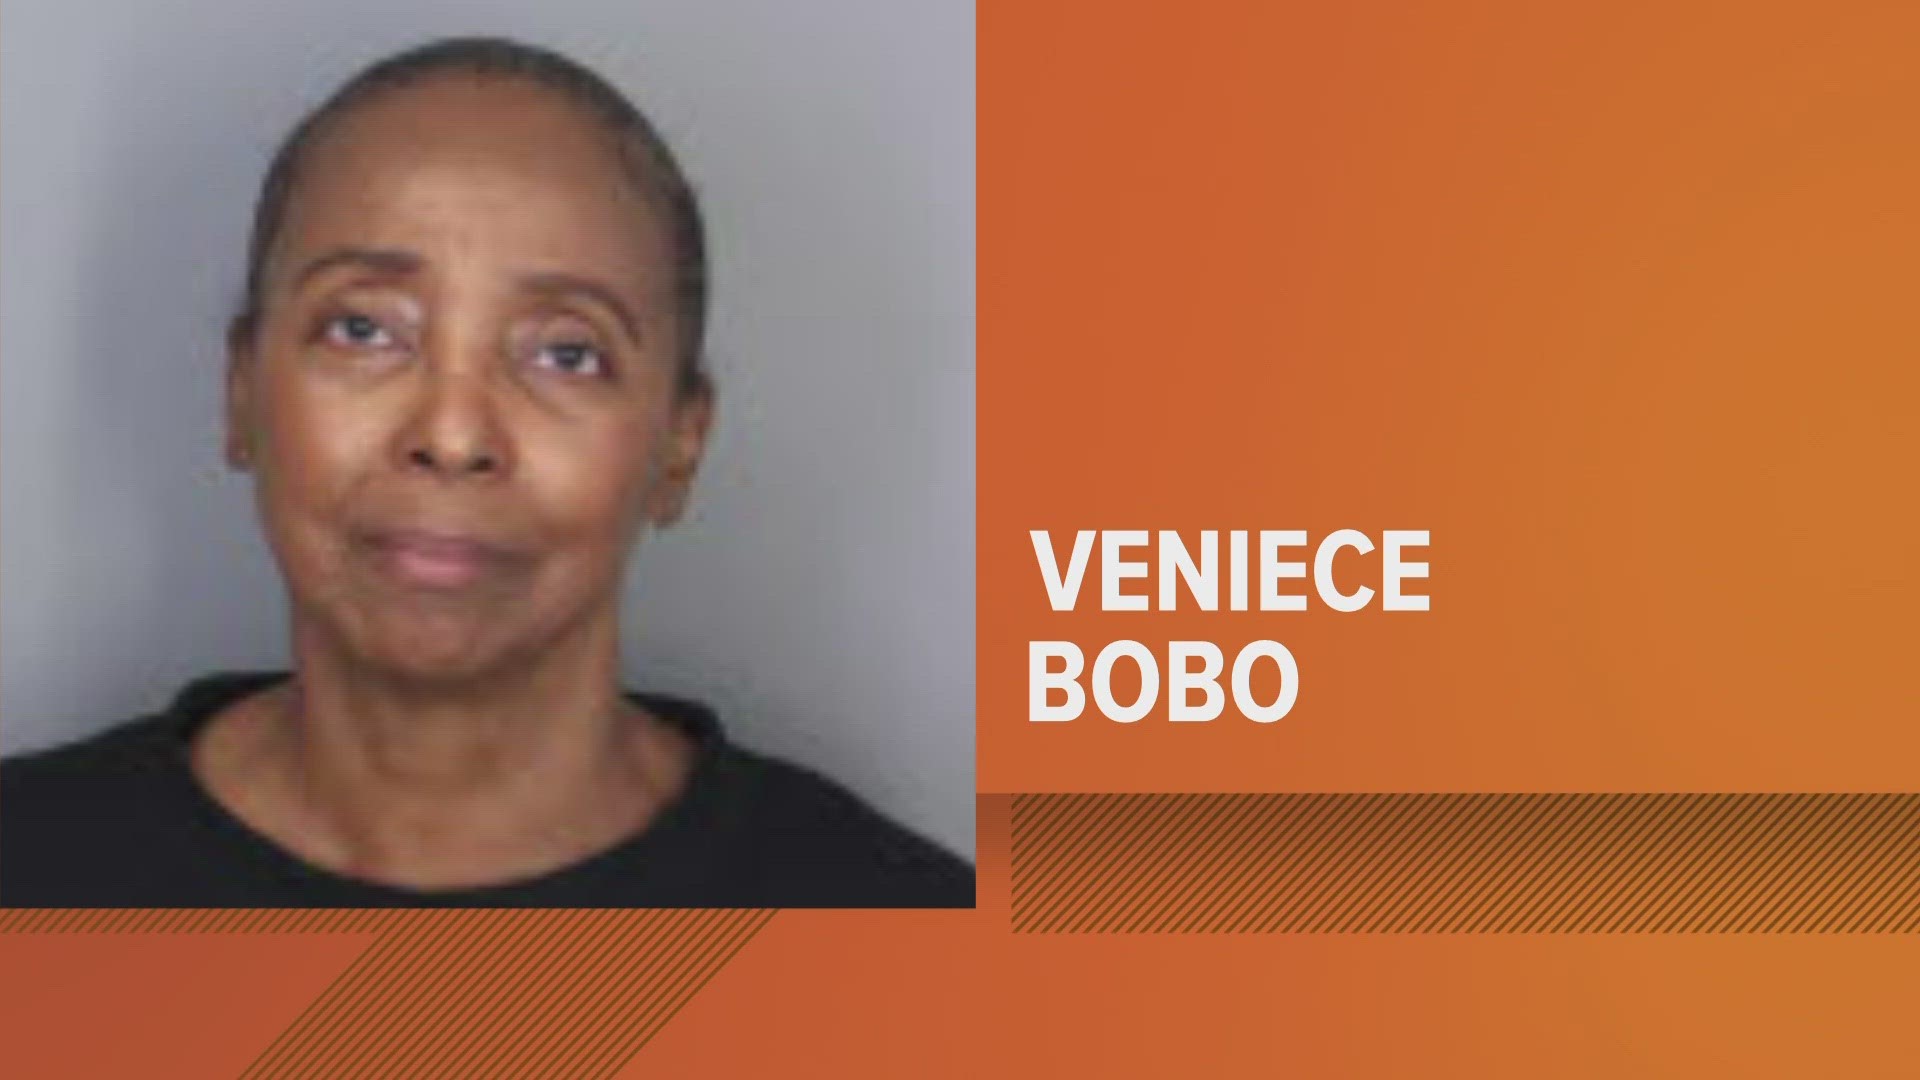 Veniece Bobo has been indicted on two Class B felony counts of property theft over $60,000.